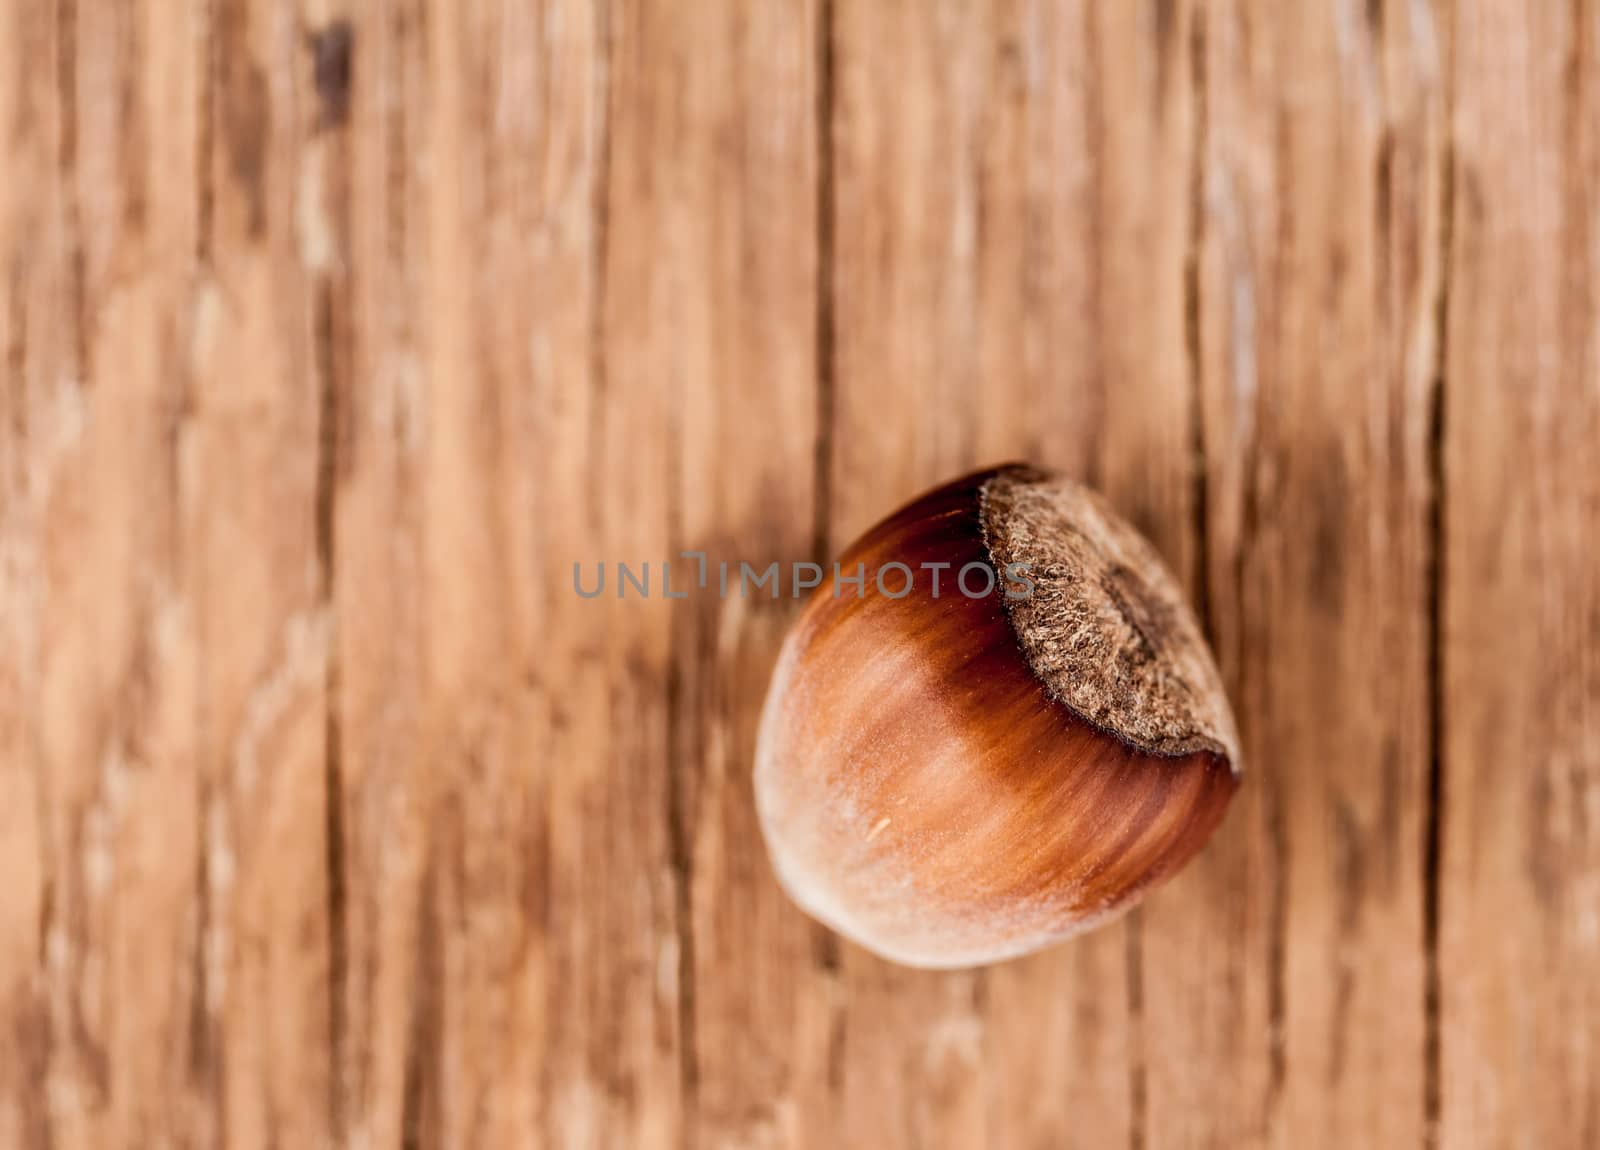 whole wood nut close-up on wooden background